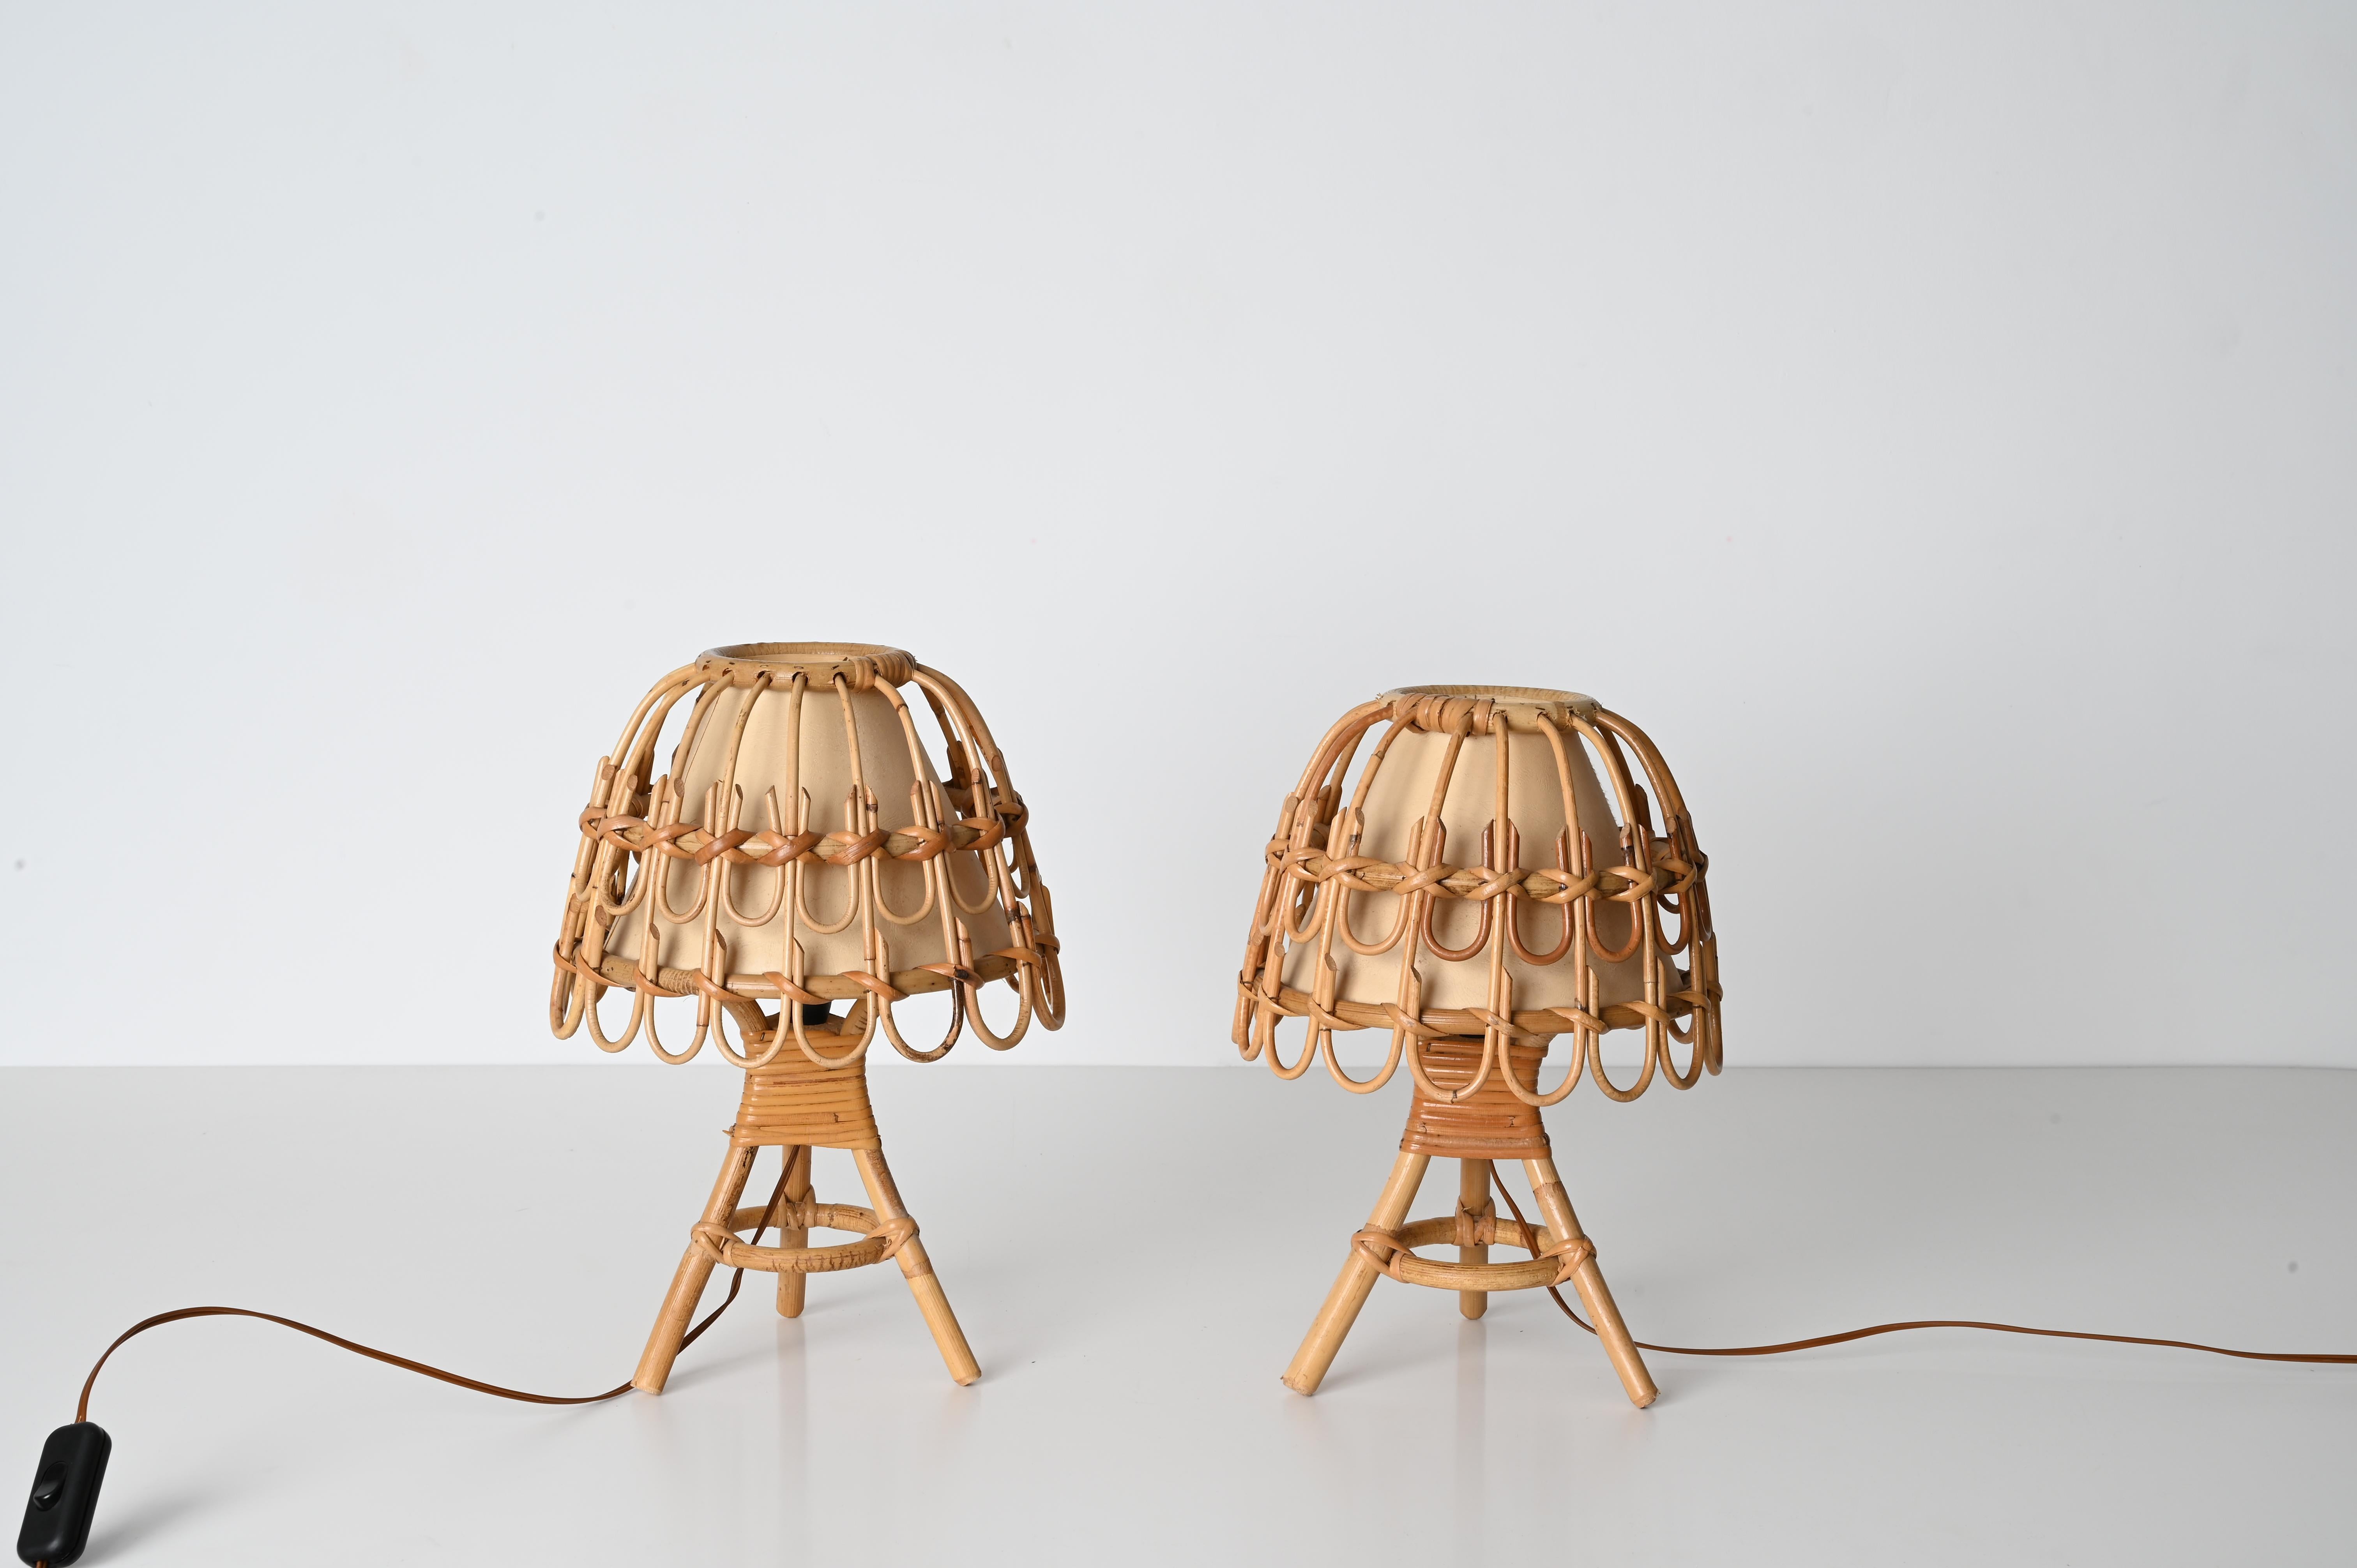 Pair of Midcentury Table Lamps in Rattan and Wicker, Louis Sognot, France, 1960s 10